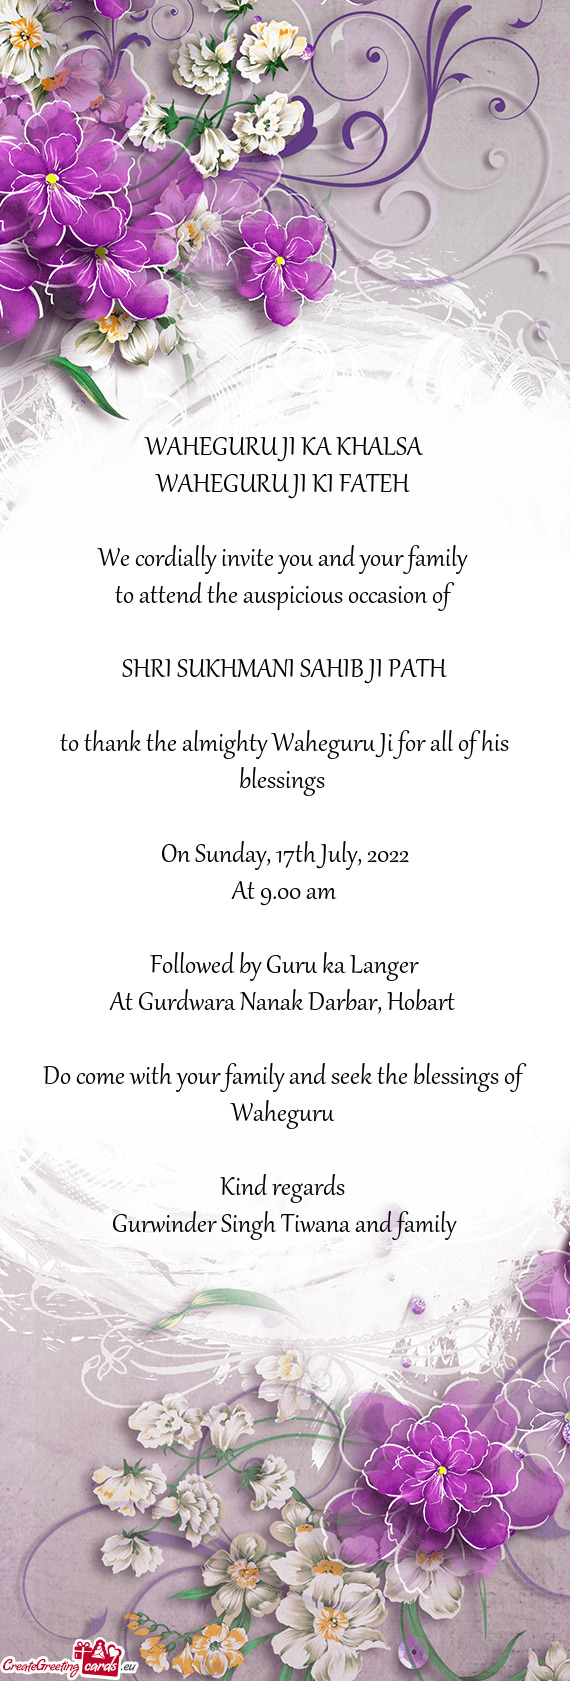 To attend the auspicious occasion of